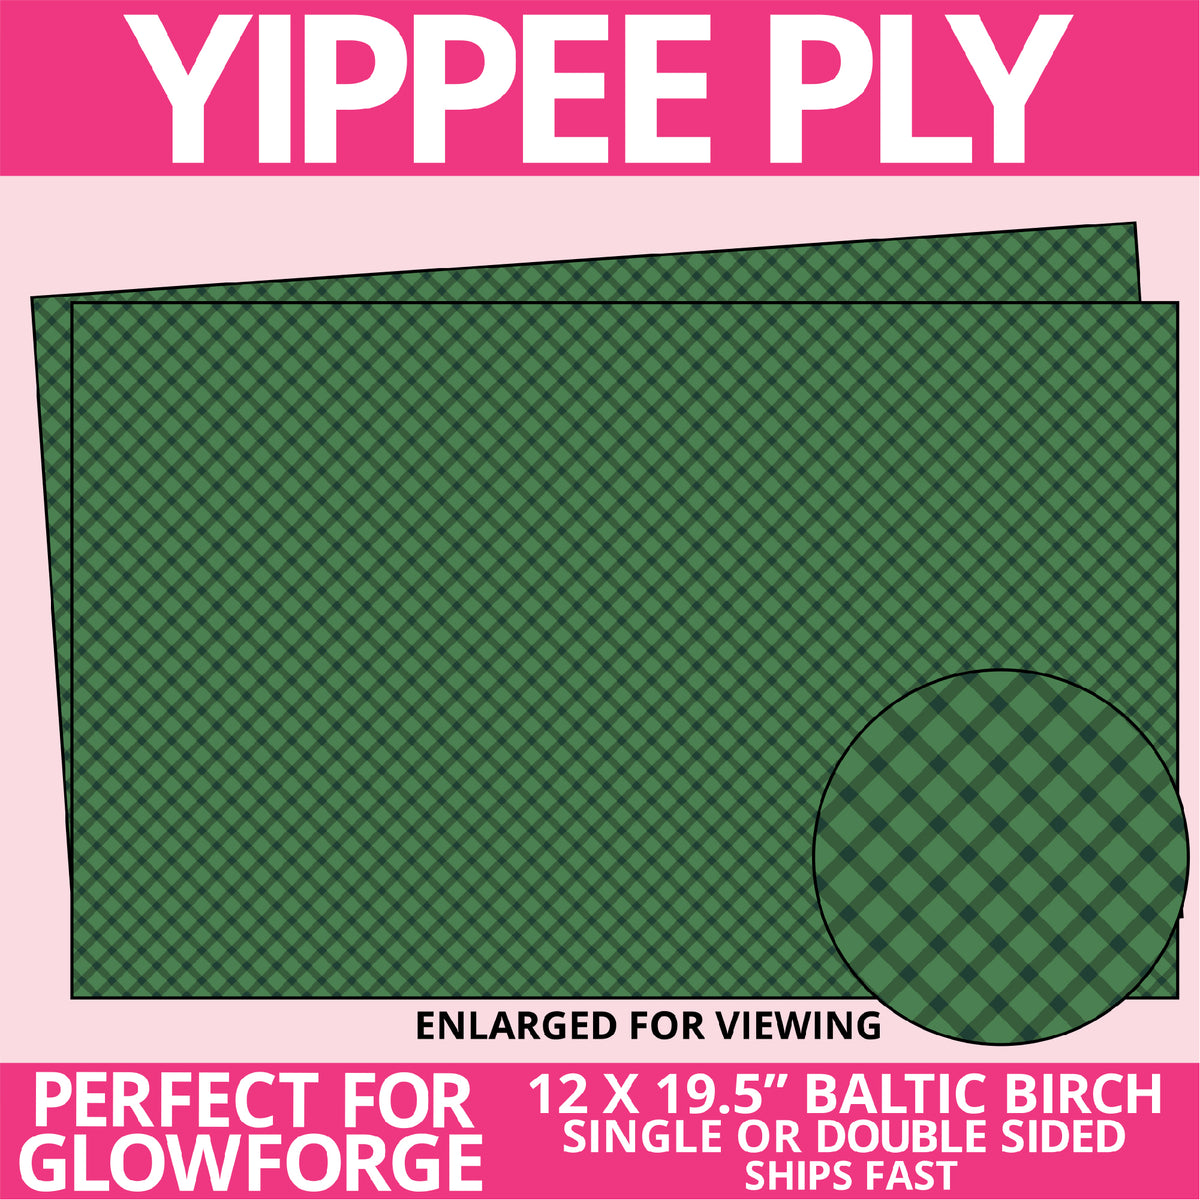 Yippee Ply Green Plaid Pattern on Birch Plywood 1029